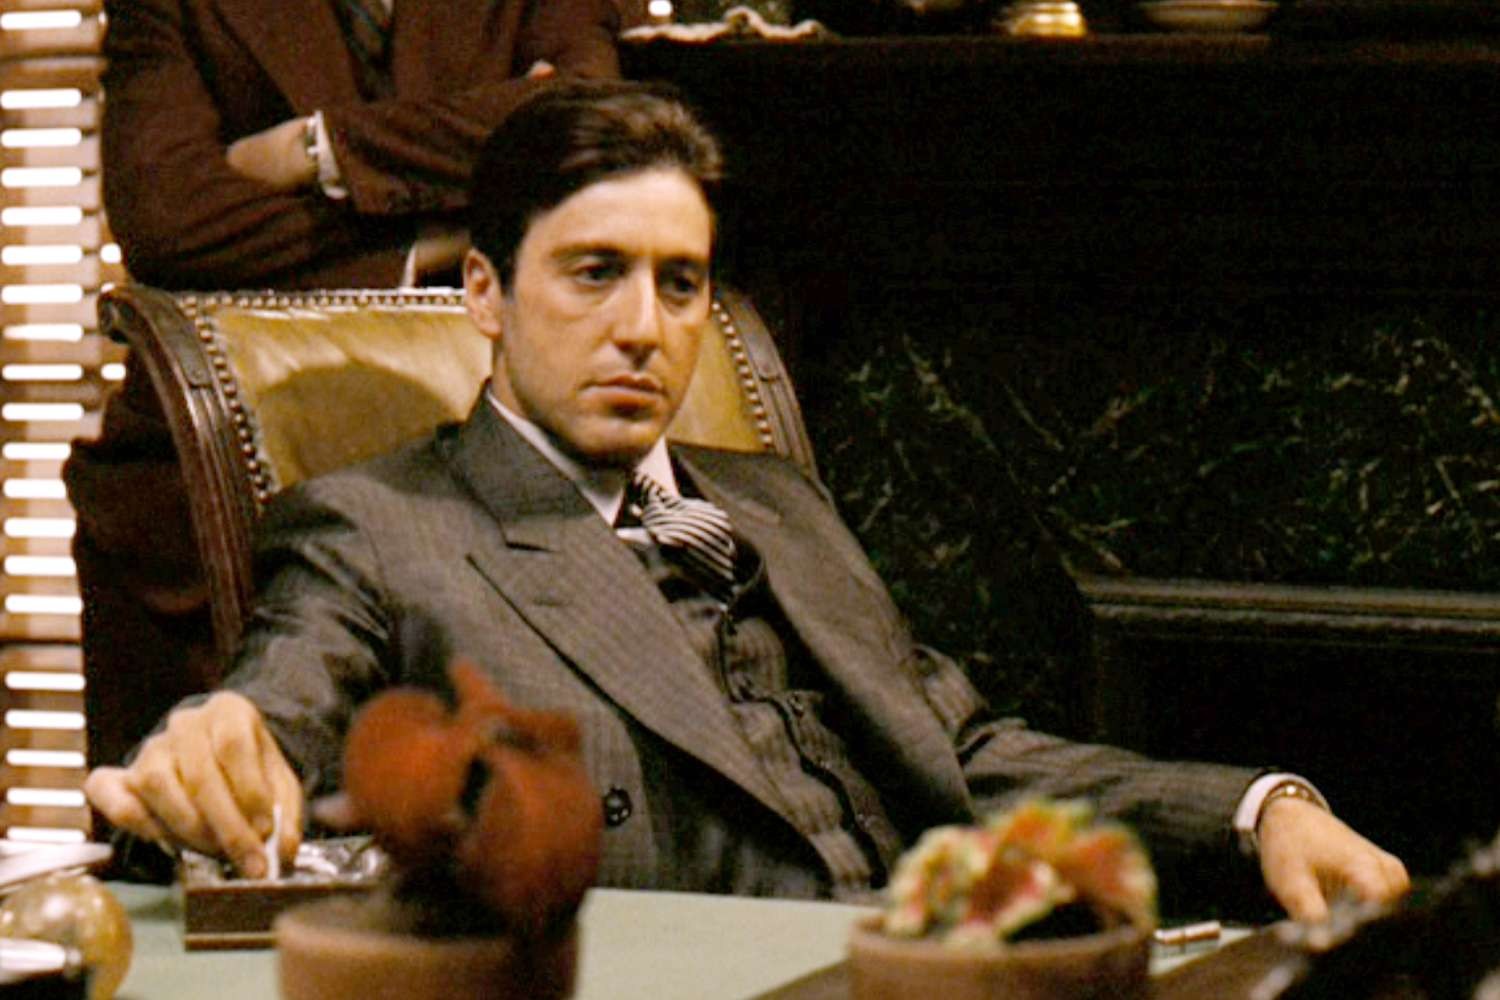 Al Pacino in The Godfather film series 